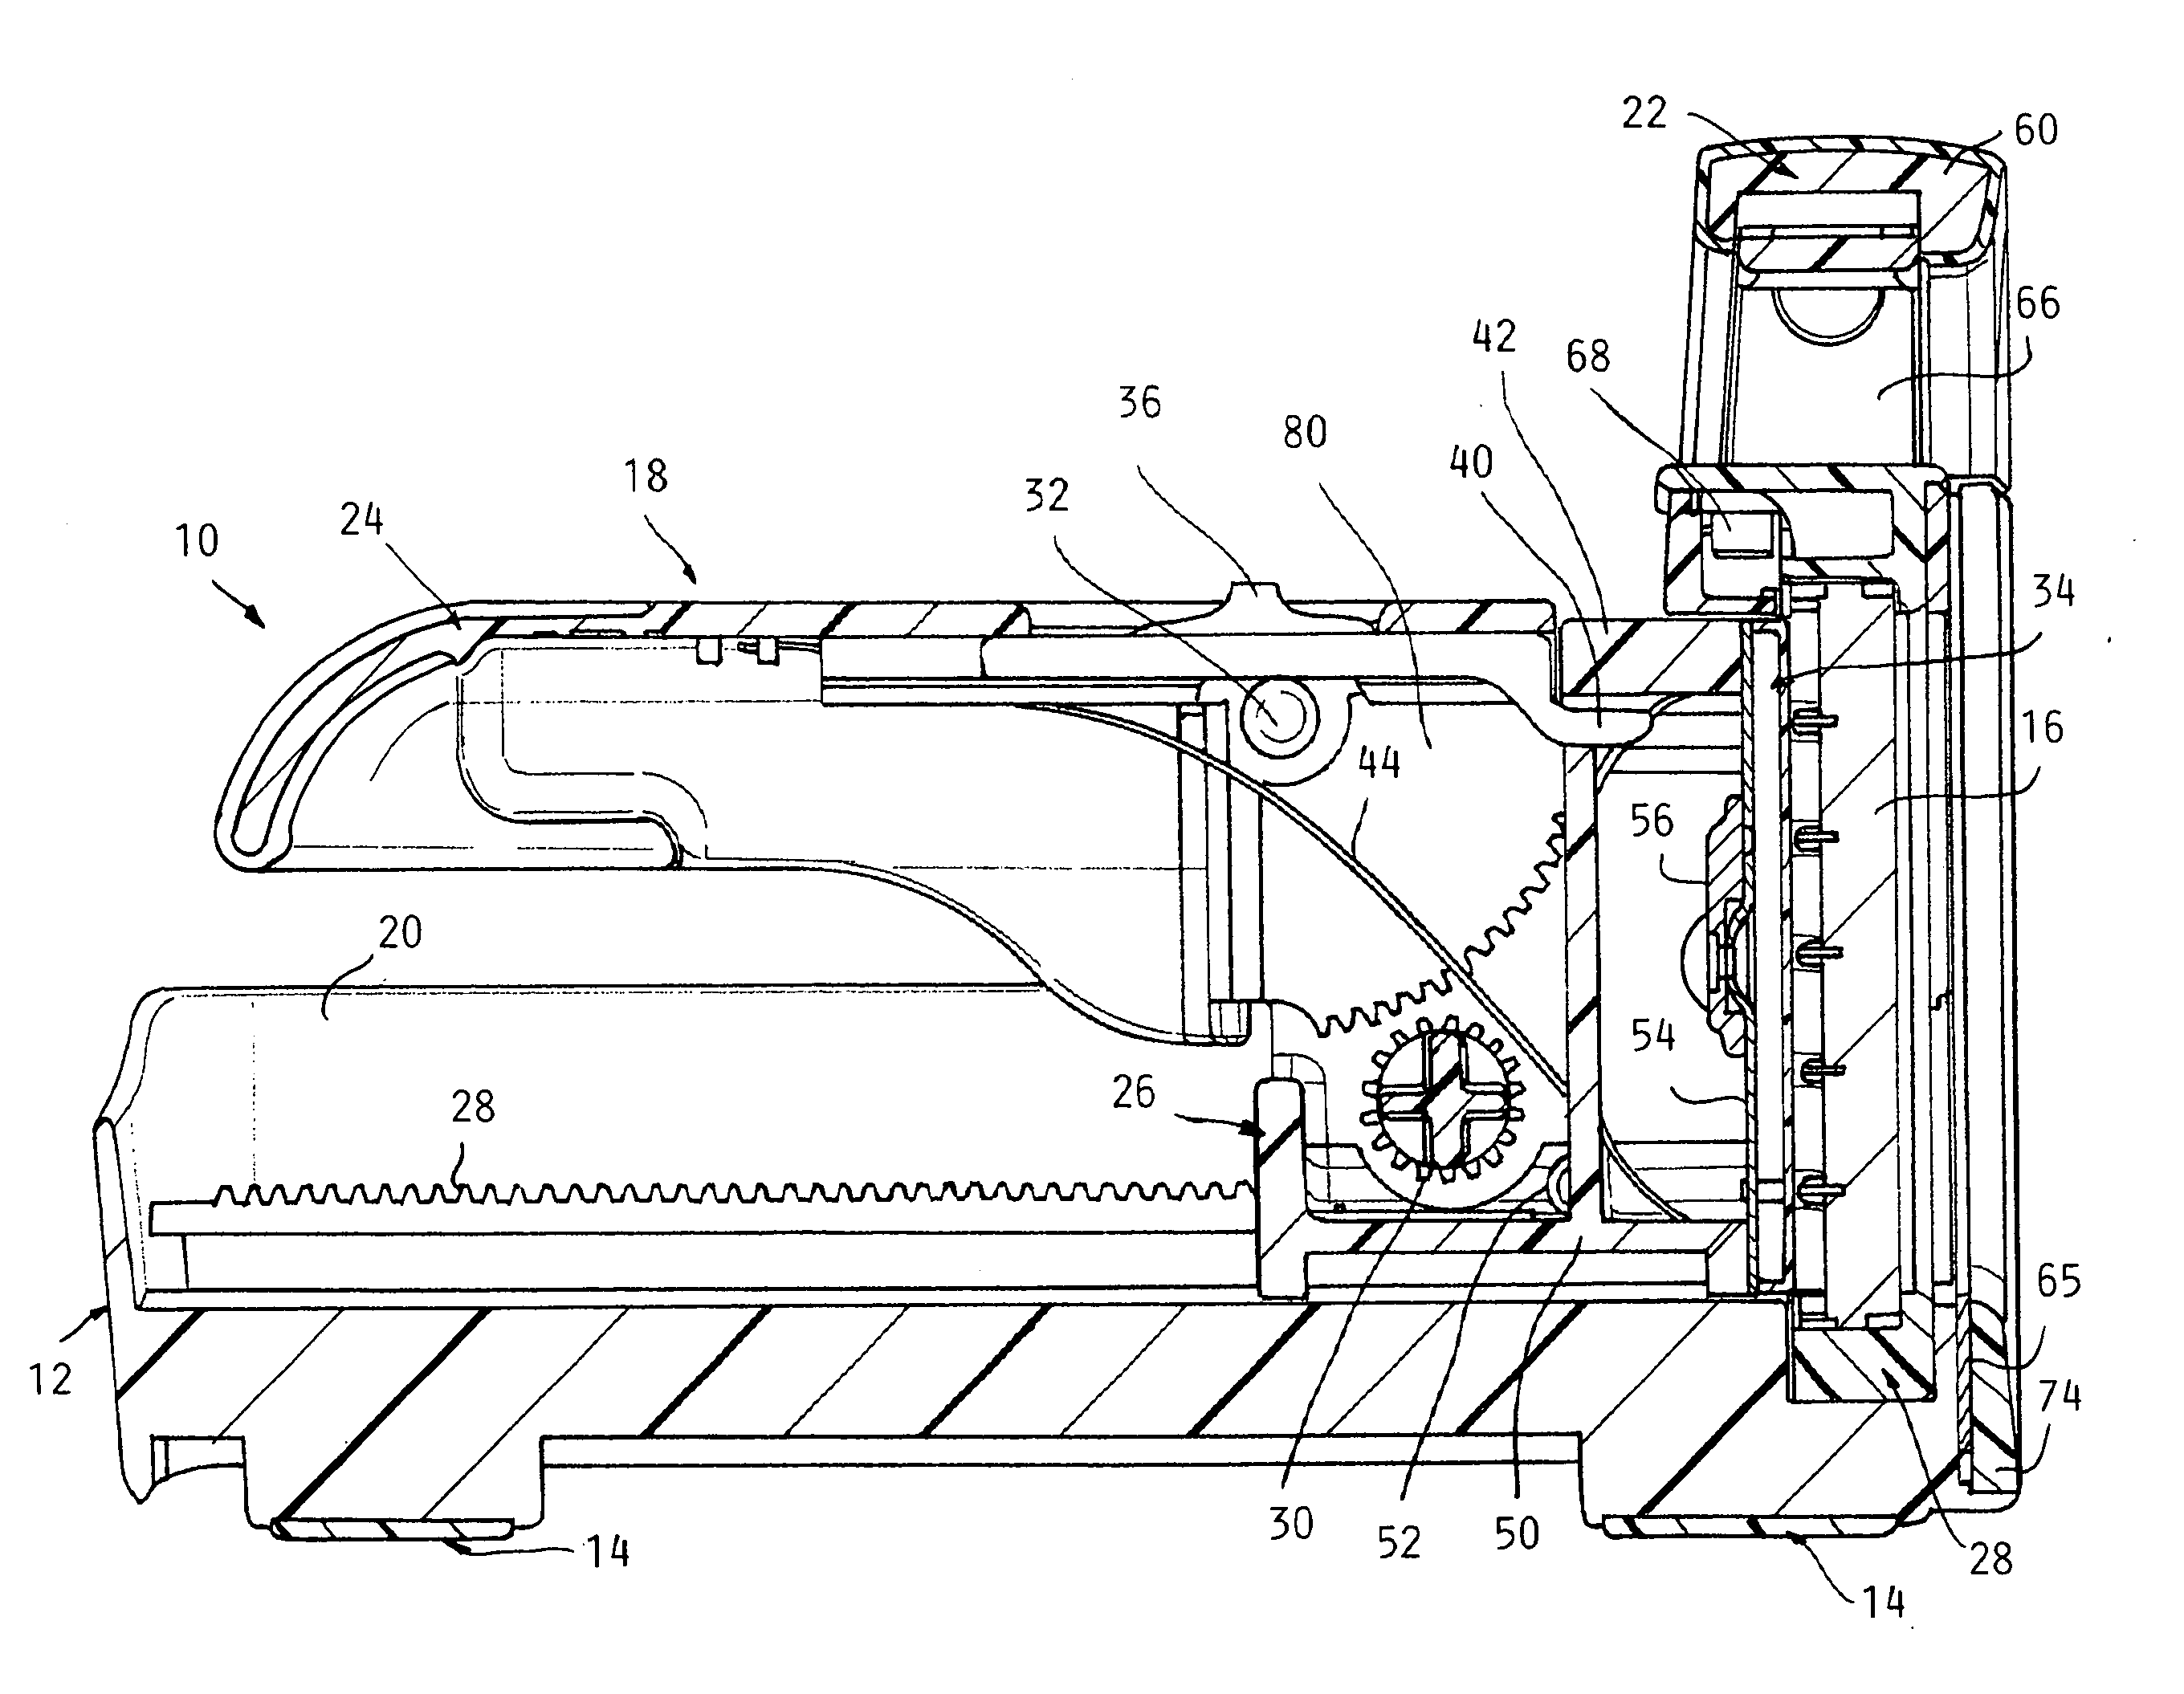 Slicing and dicing device